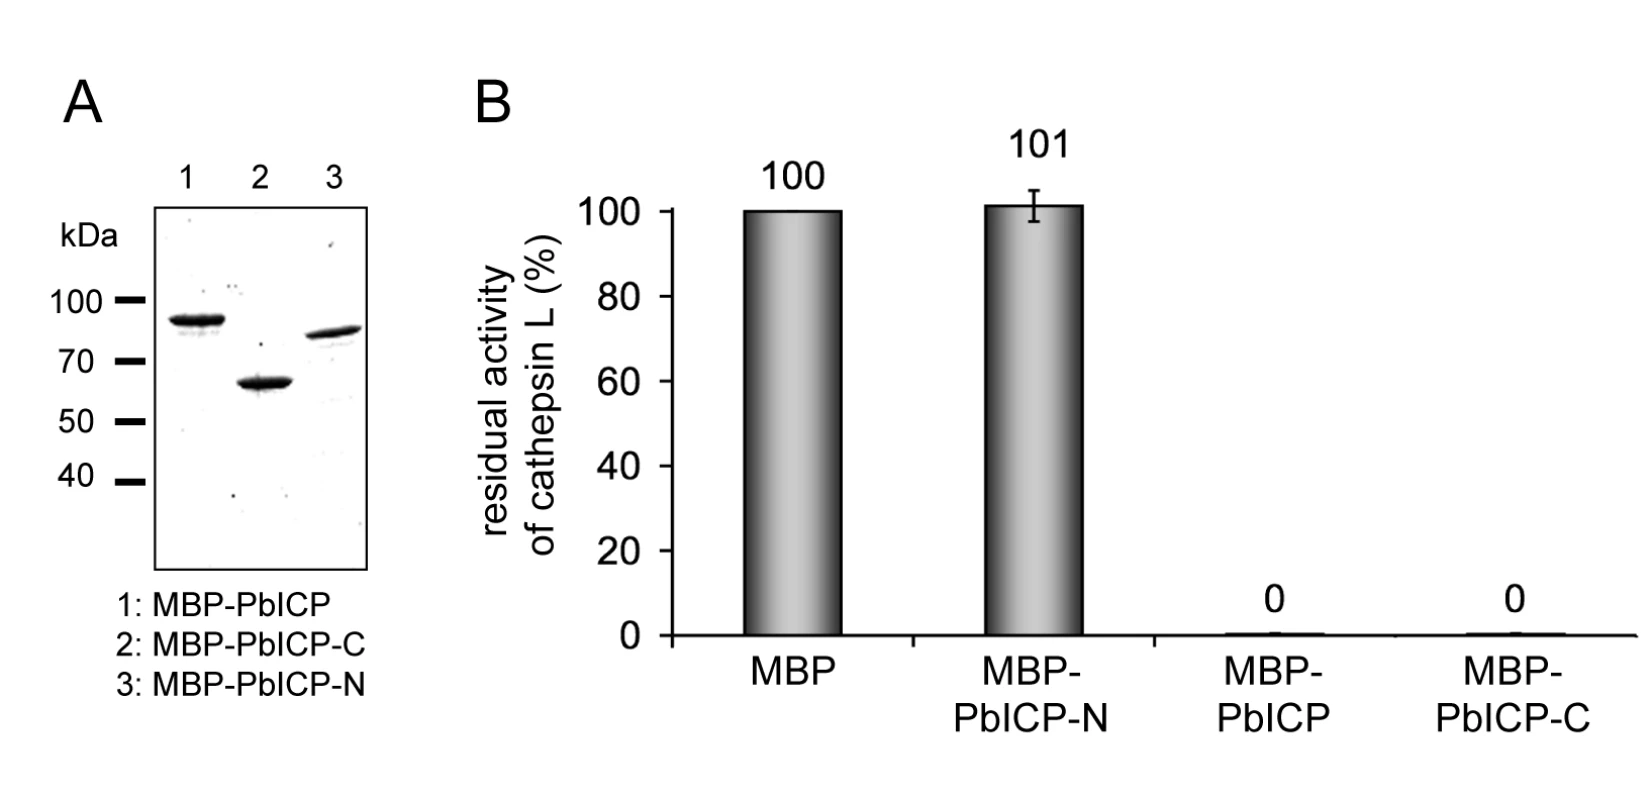 The C-terminal domain of PbICP is necessary and sufficient for the inhibitor function.